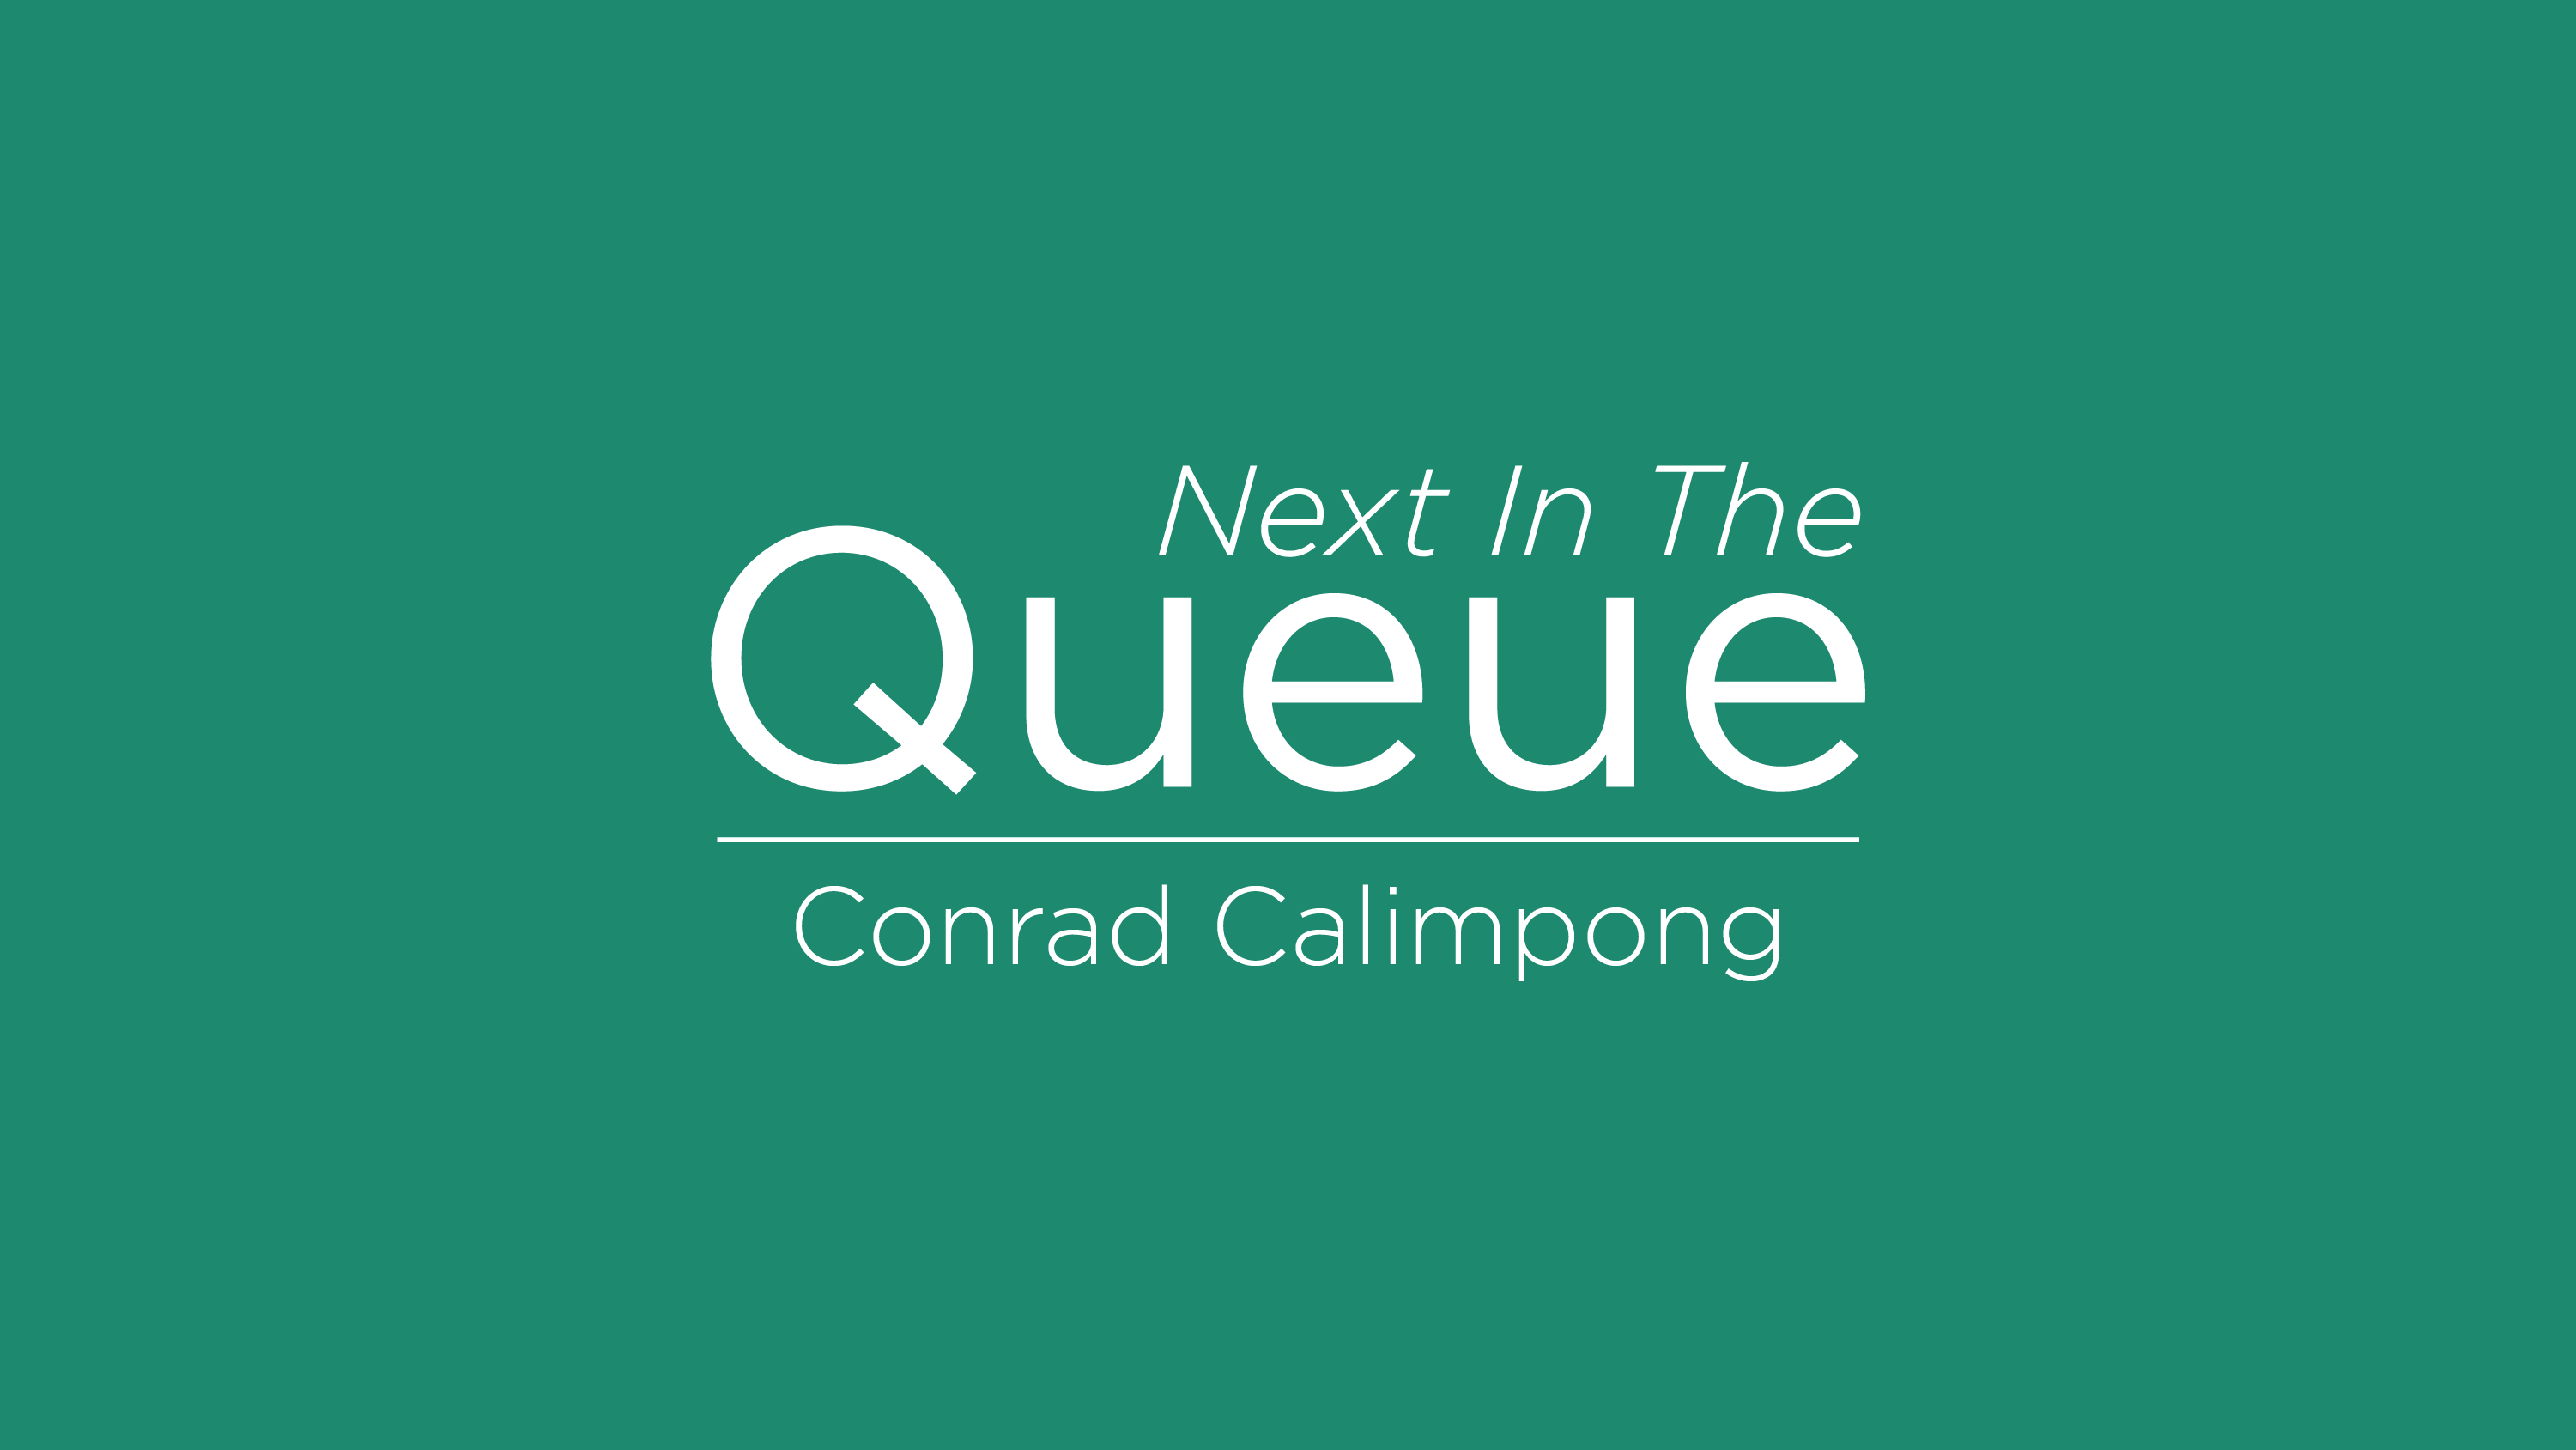 blog post cover graphic for the queue featuring conrad calimpong